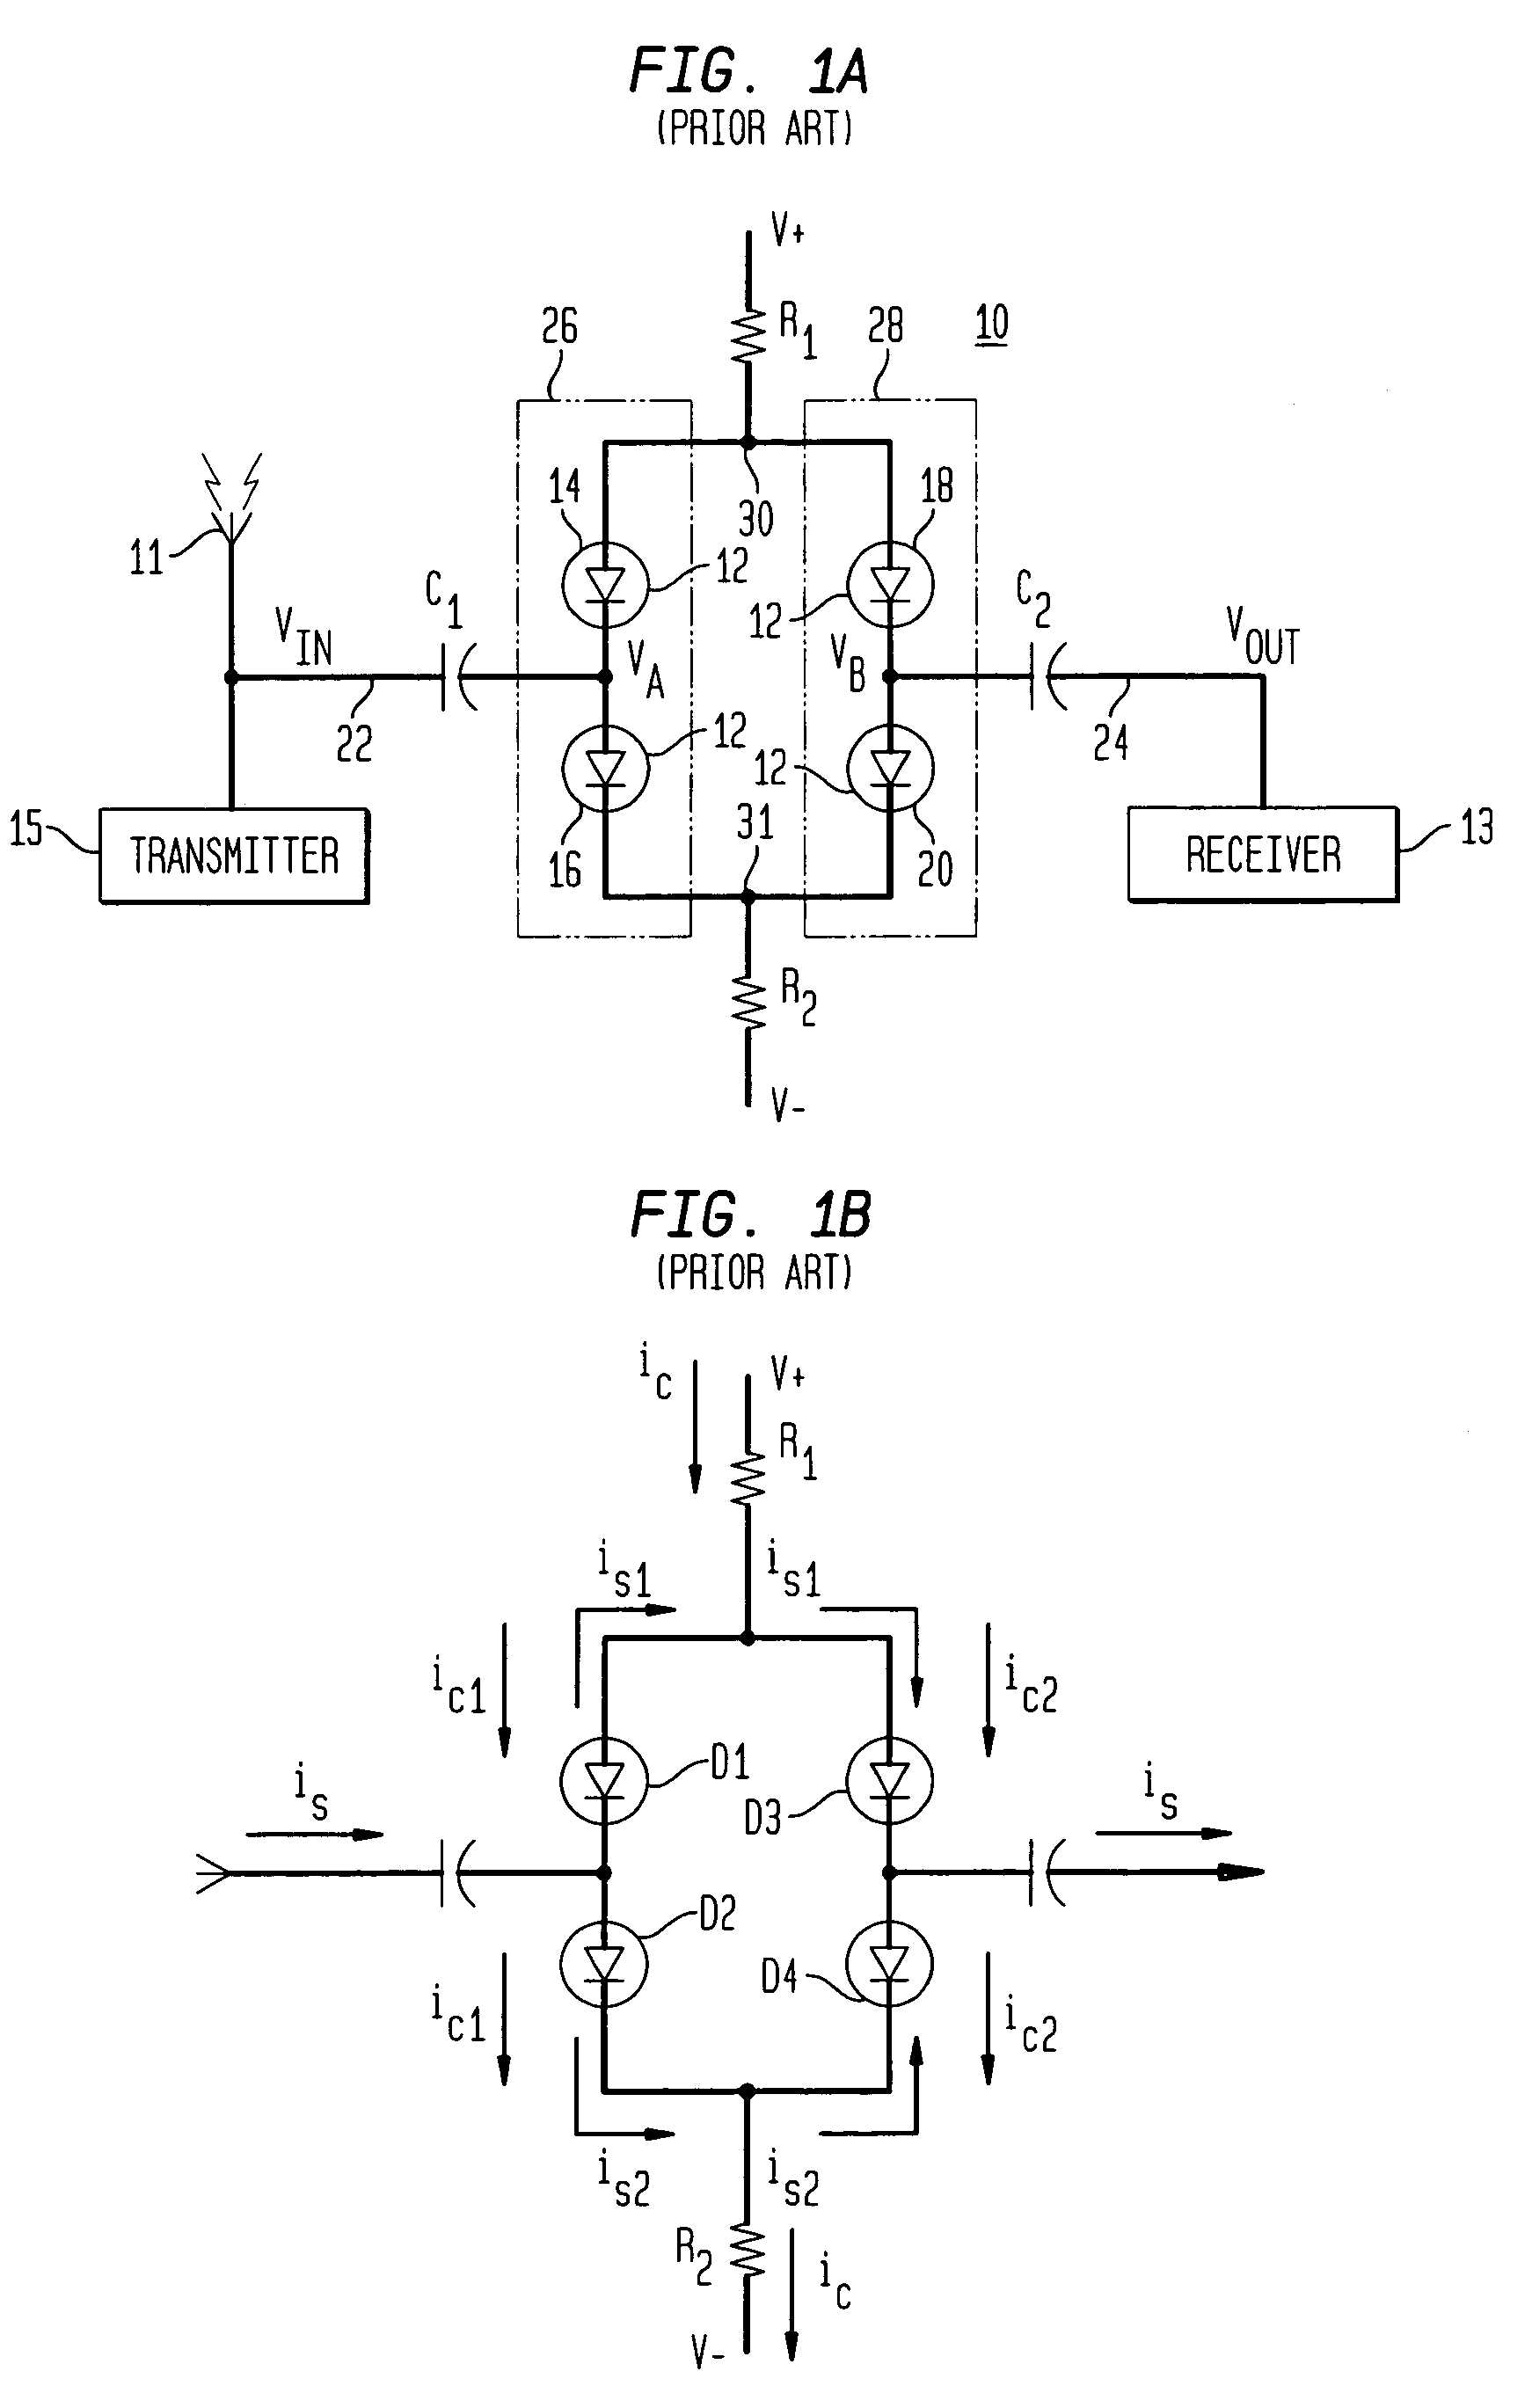 Transmit and receive protection circuit